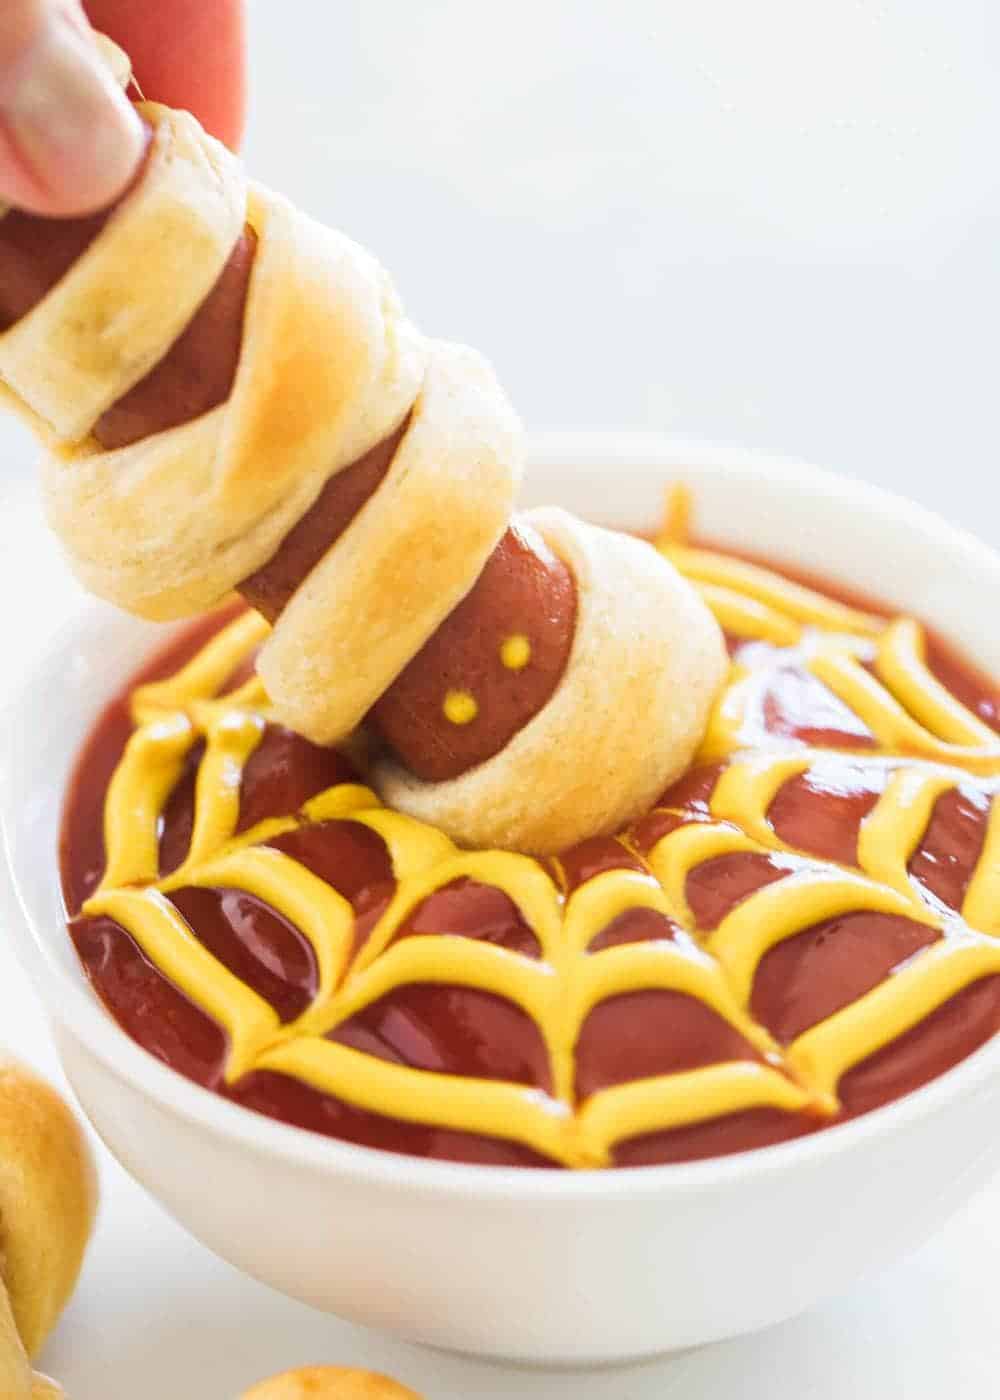 Dipping hot dog mummy into spider sauce.